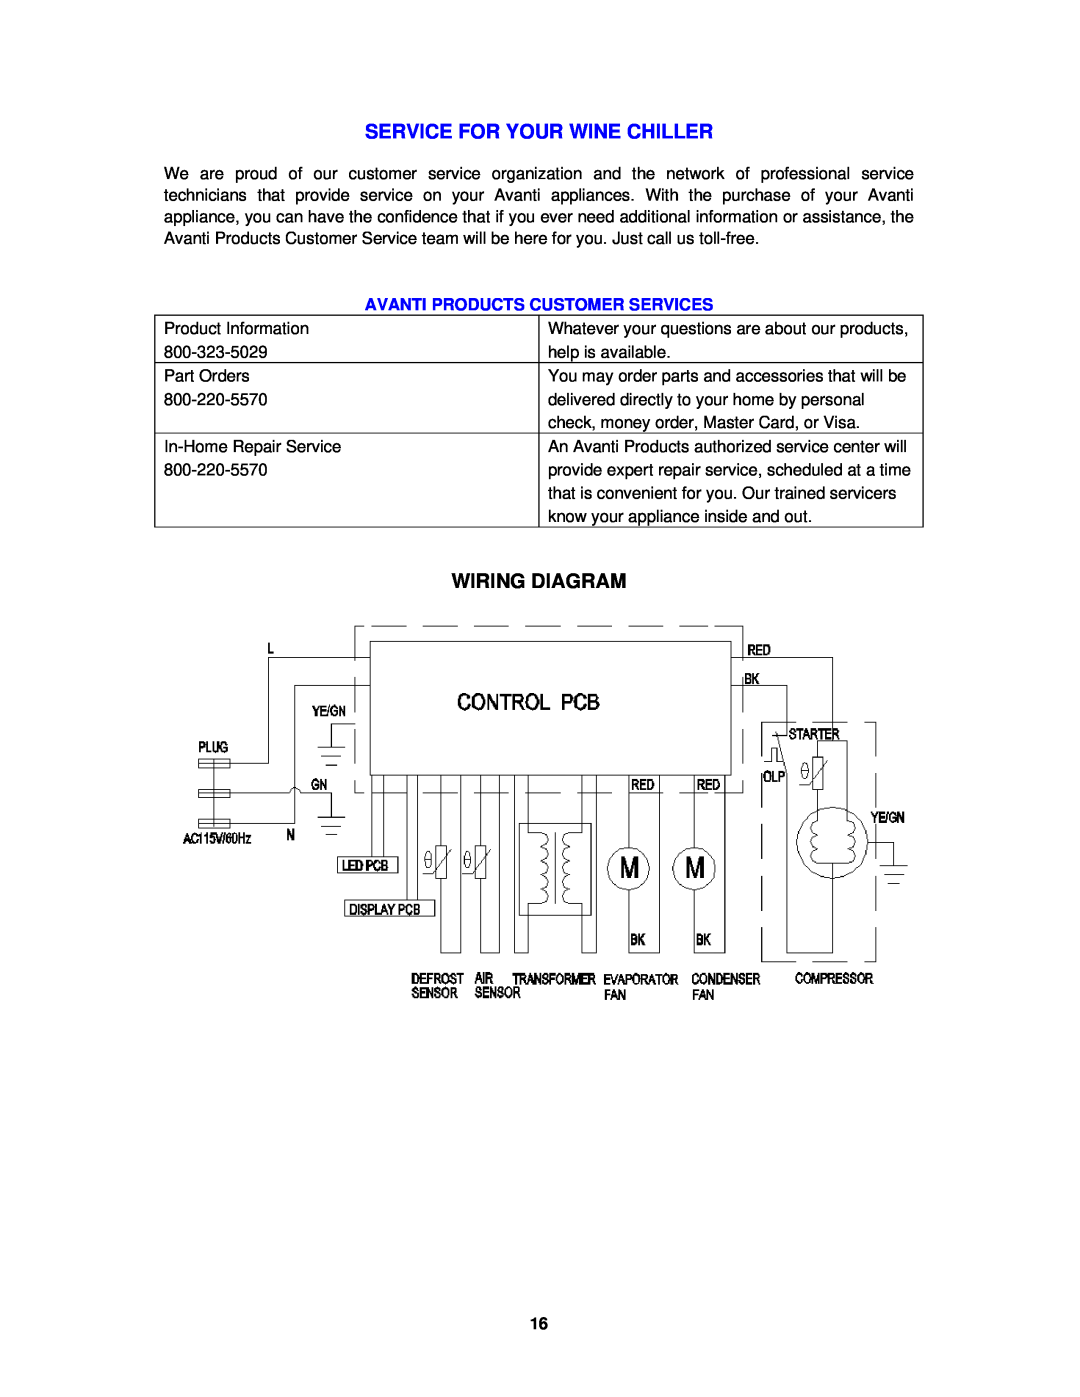 Avanti WCR5449SS instruction manual Service For Your Wine Chiller, Wiring Diagram 